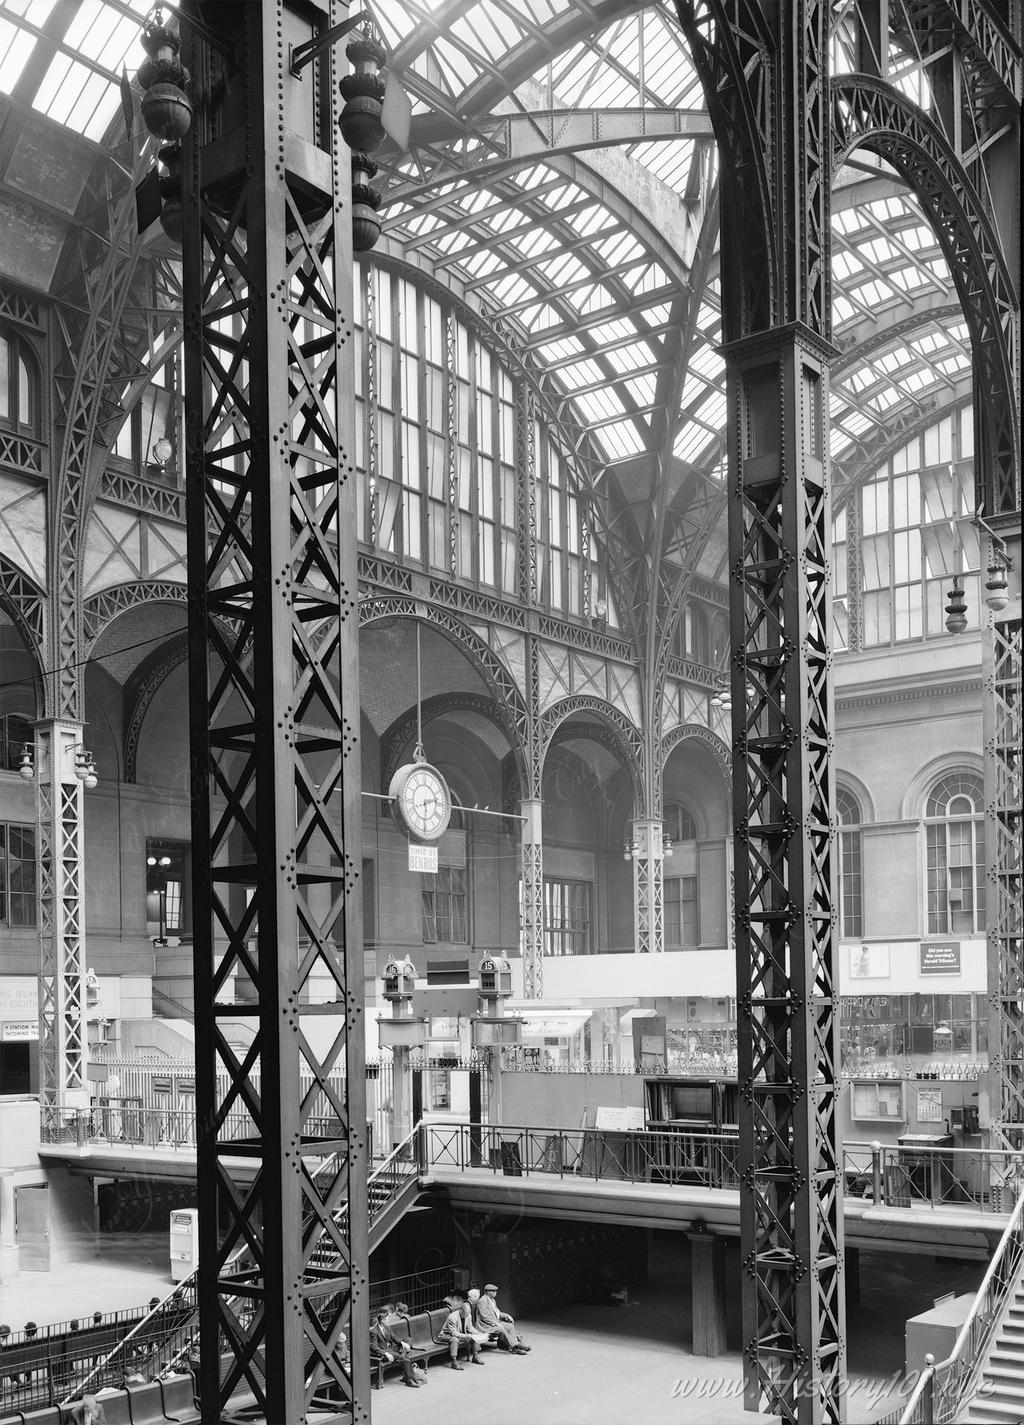 Photograph of the steel support beams of Pennsylvania Station's famous Main Concourse.